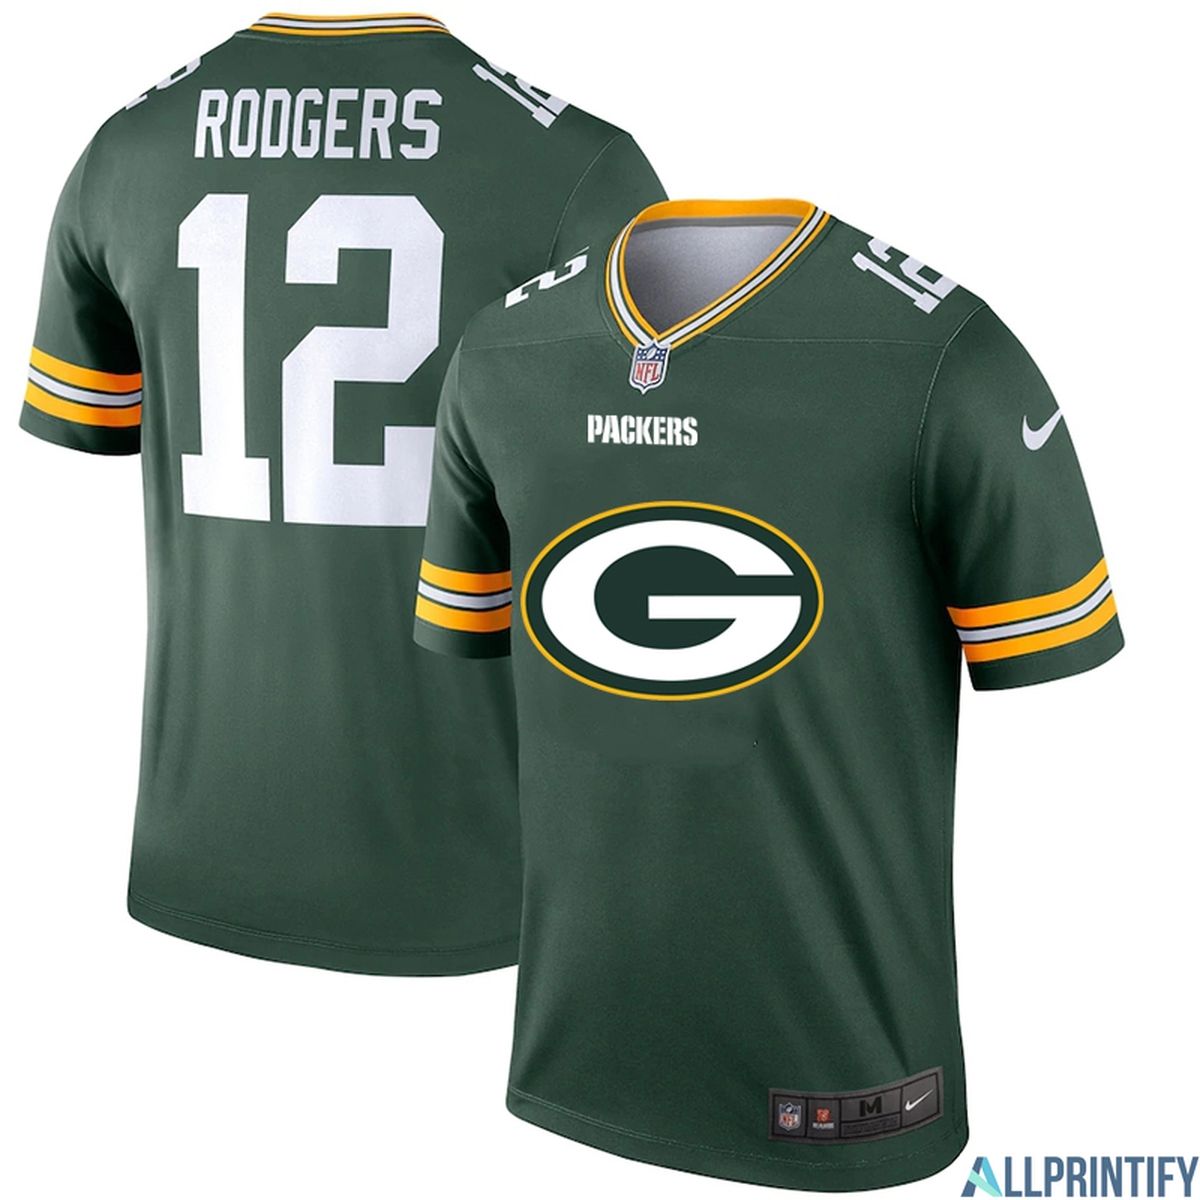 Aaron Rodgers Green Bay Packers 12 Green Vapor Limited Jersey